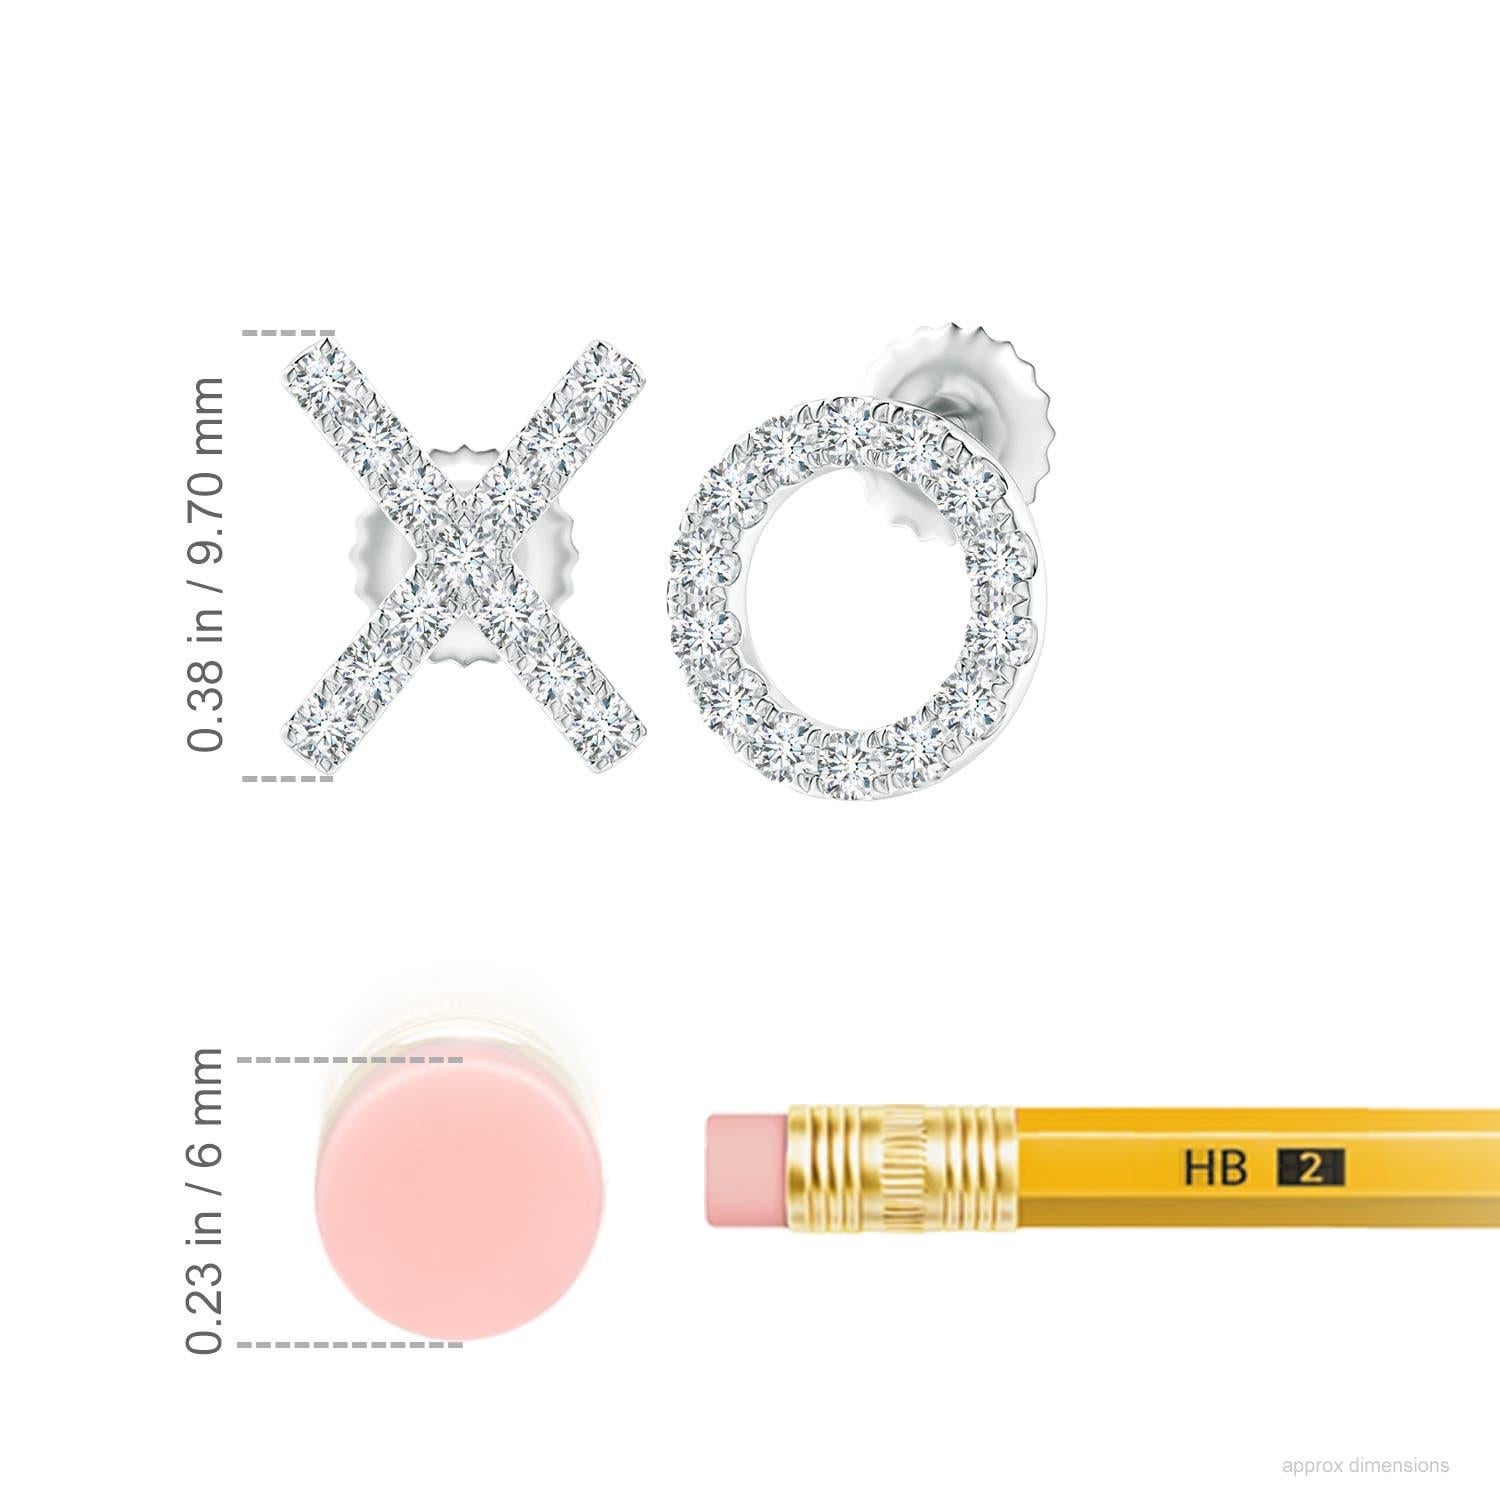 The XO stud earrings designed in platinum are simply fascinating. Sparkling round diamonds in a U pava setting brilliantly embellish the XO pattern, adding a dazzling touch to these adorable stud earrings.
Diamond is the Birthstone for April and